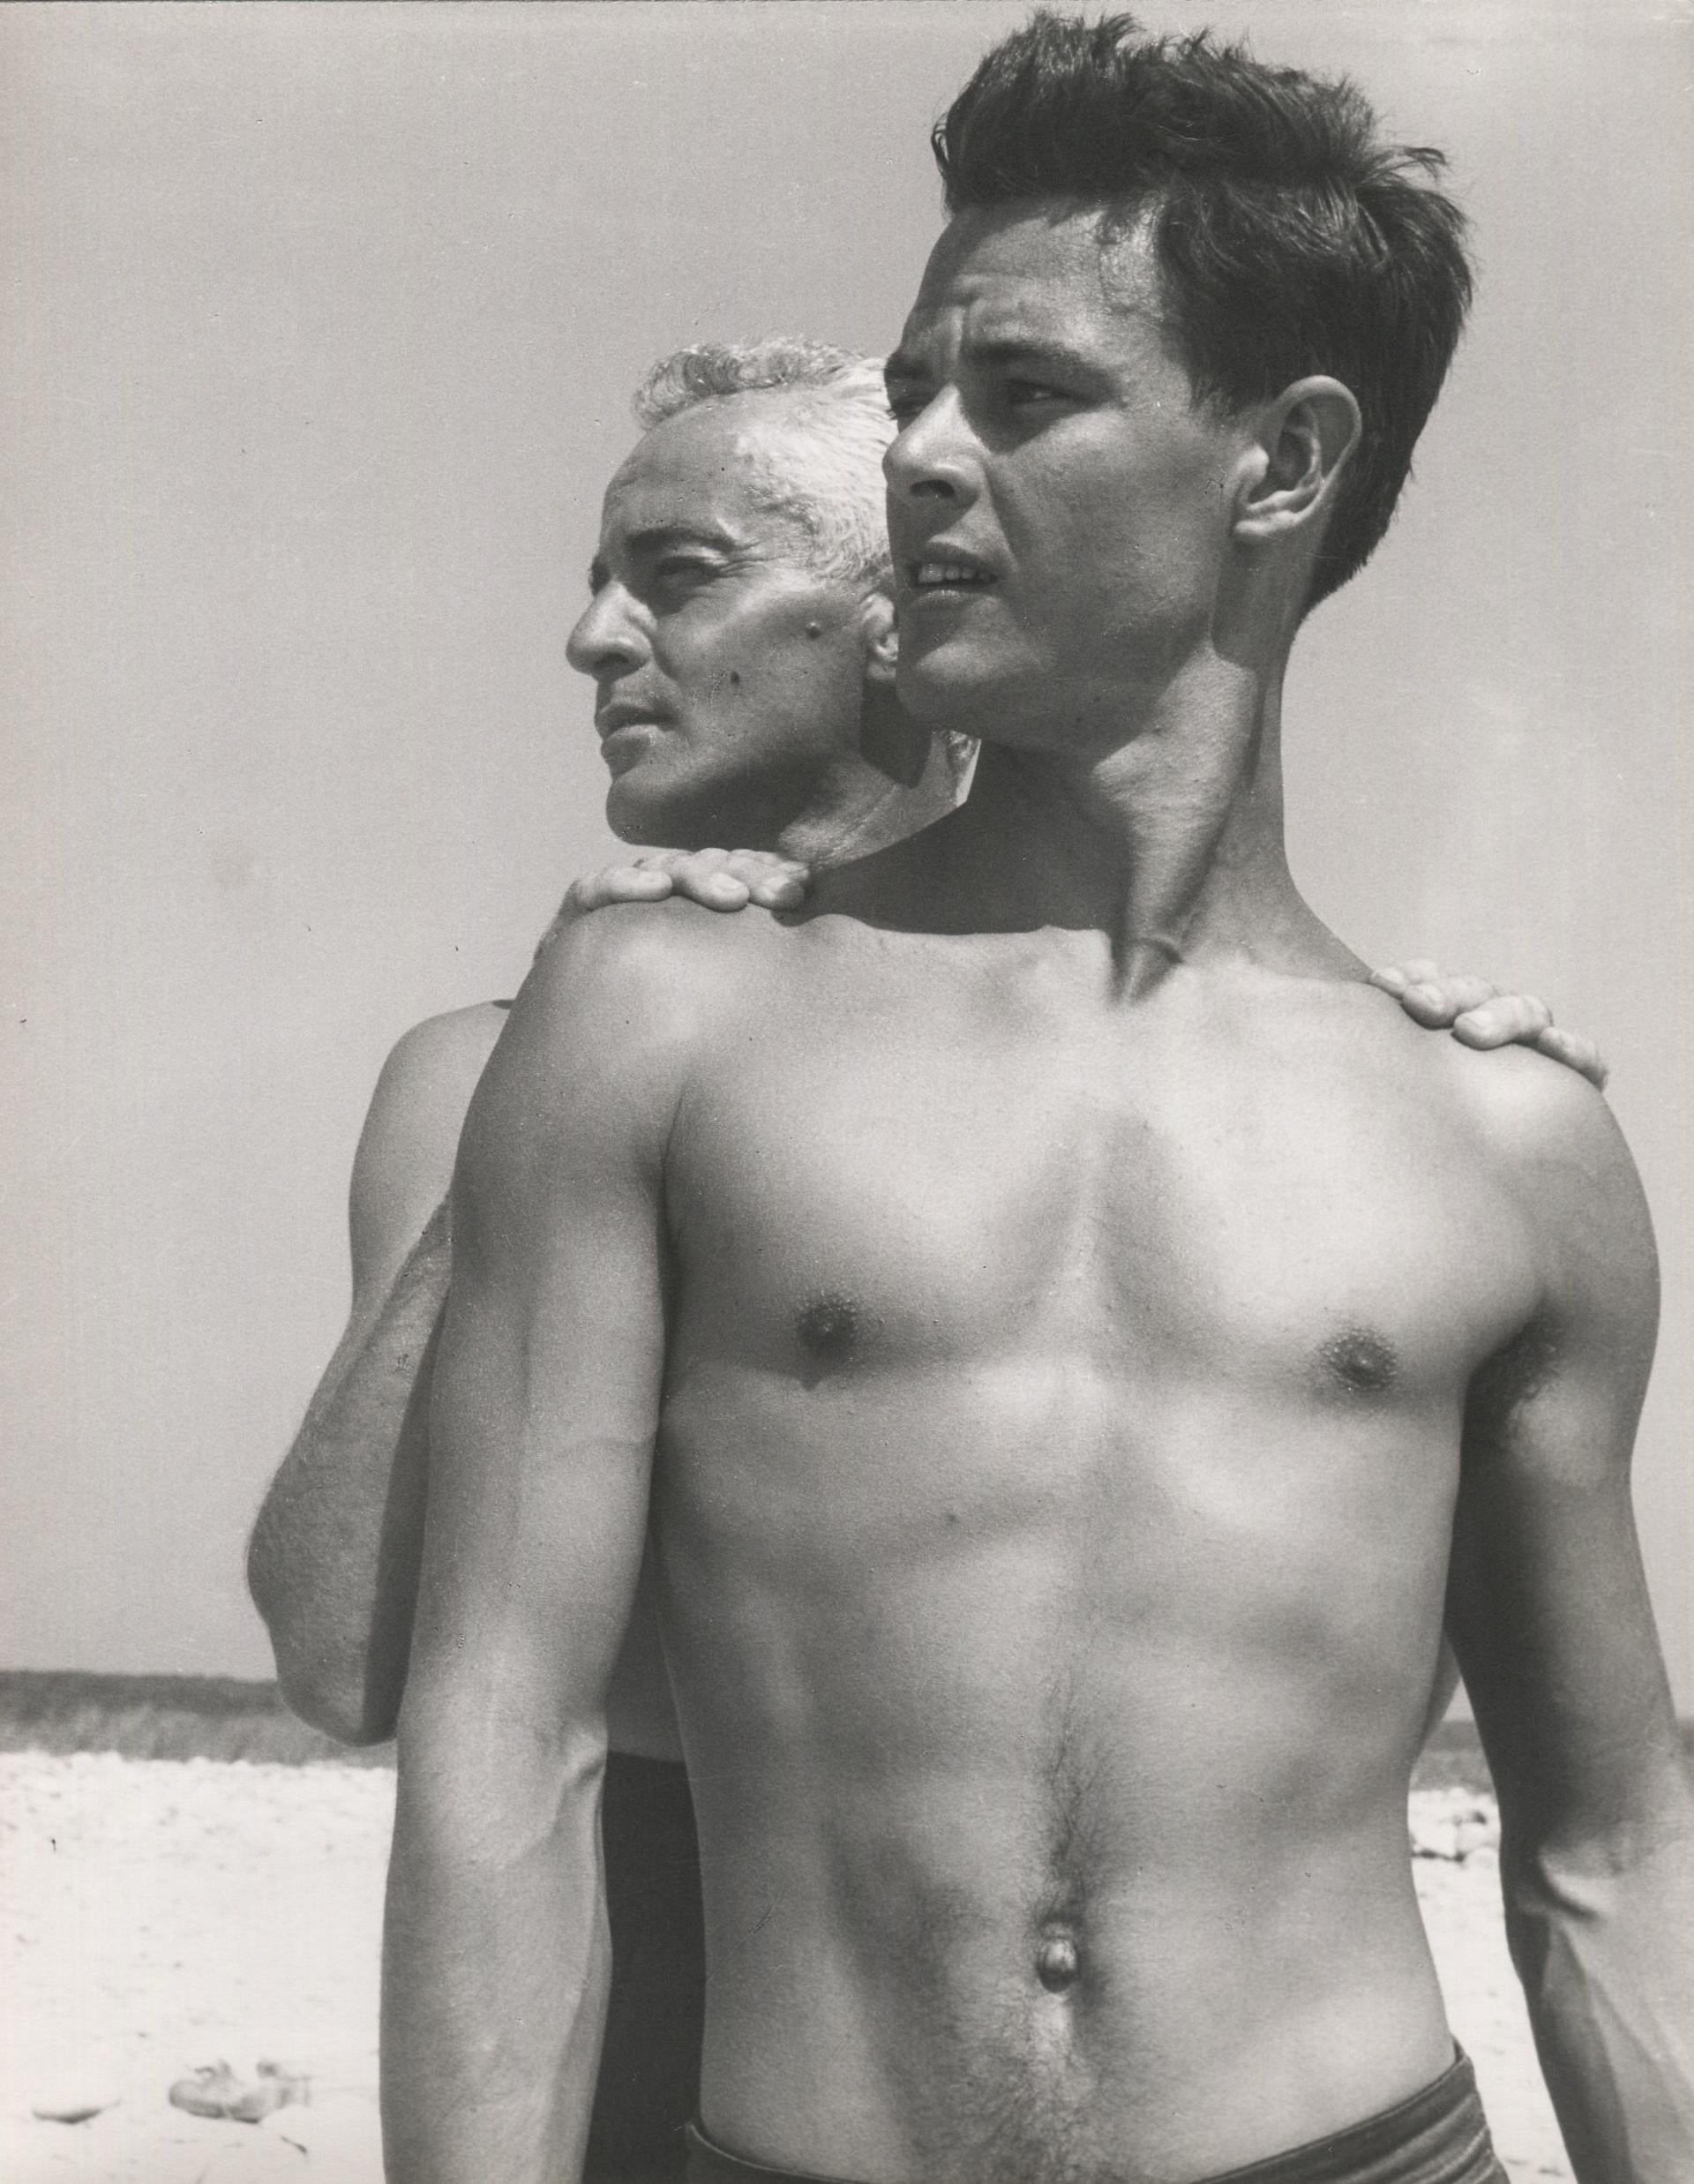 This photograph by George Platt Lynes is offered by CLAMP in New York City.

George Platt Lynes and Model on the Beach
Studio stamp in ink, verso

Vintage gelatin silver print

9.375 x 7.25 inches (23.8 18.4 cm)

Contact gallery for price.